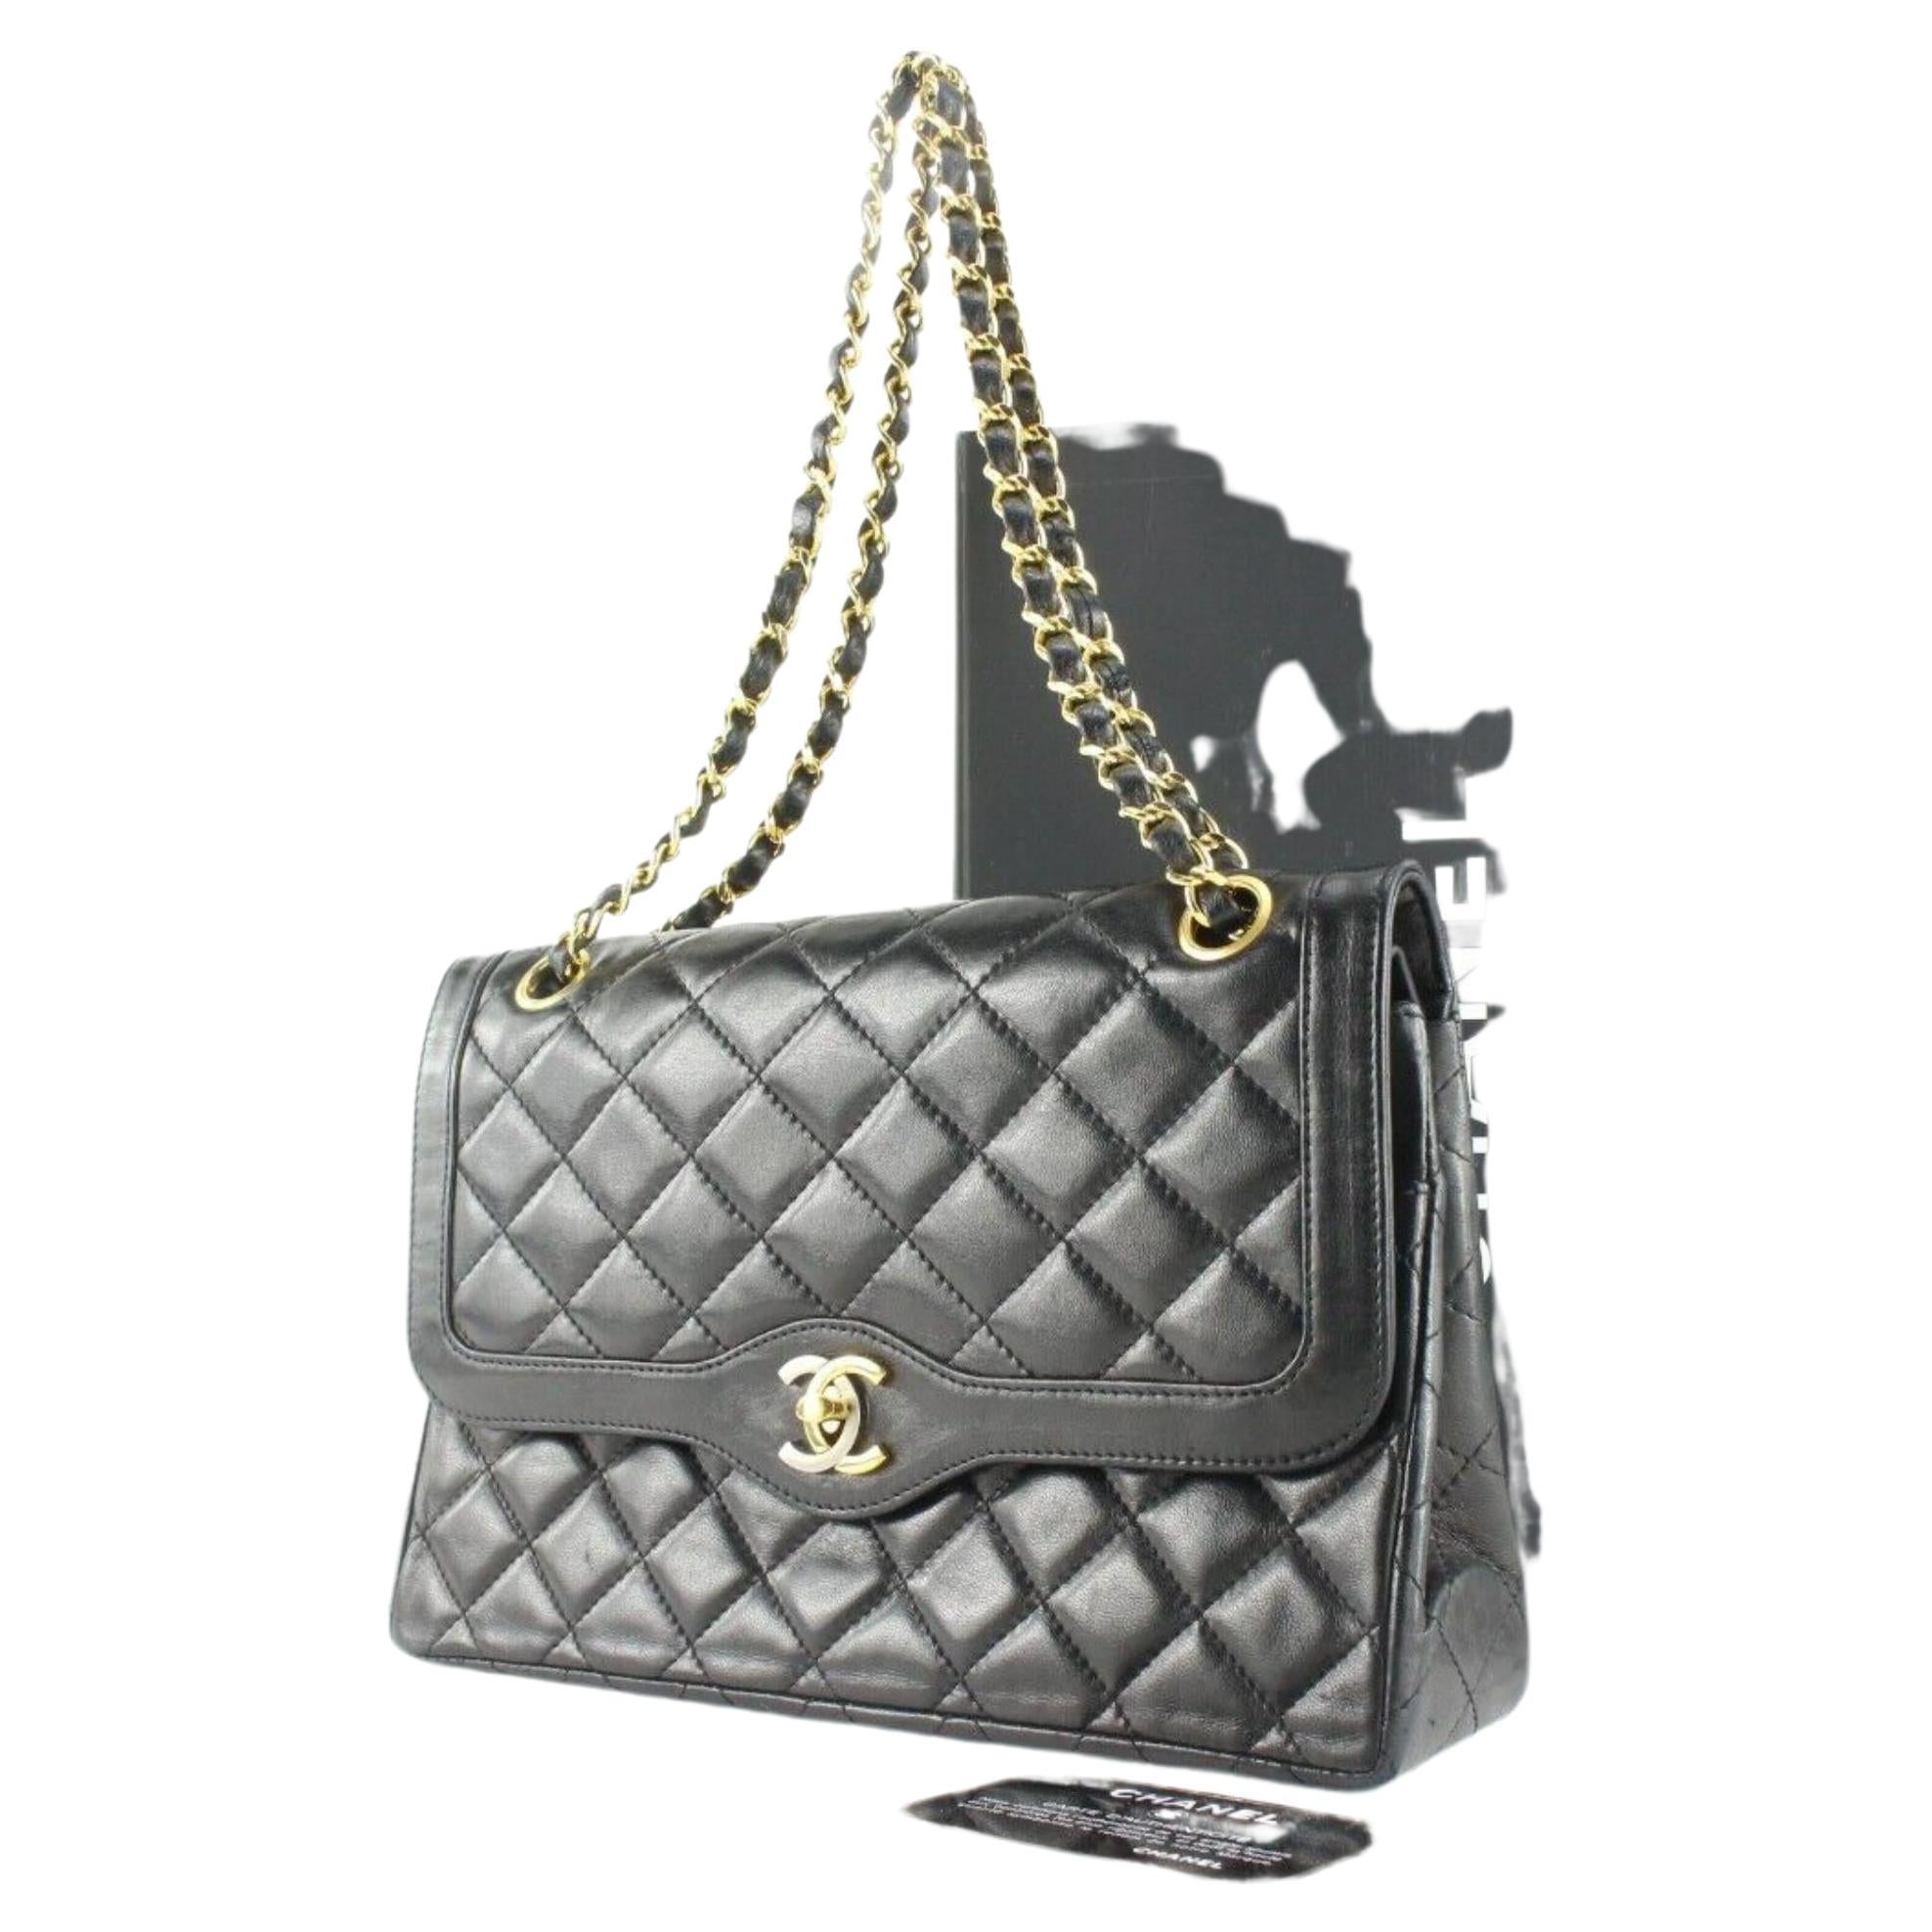 Lot - Classic CHANEL Two Toned Calfskin Leather Flap Bag